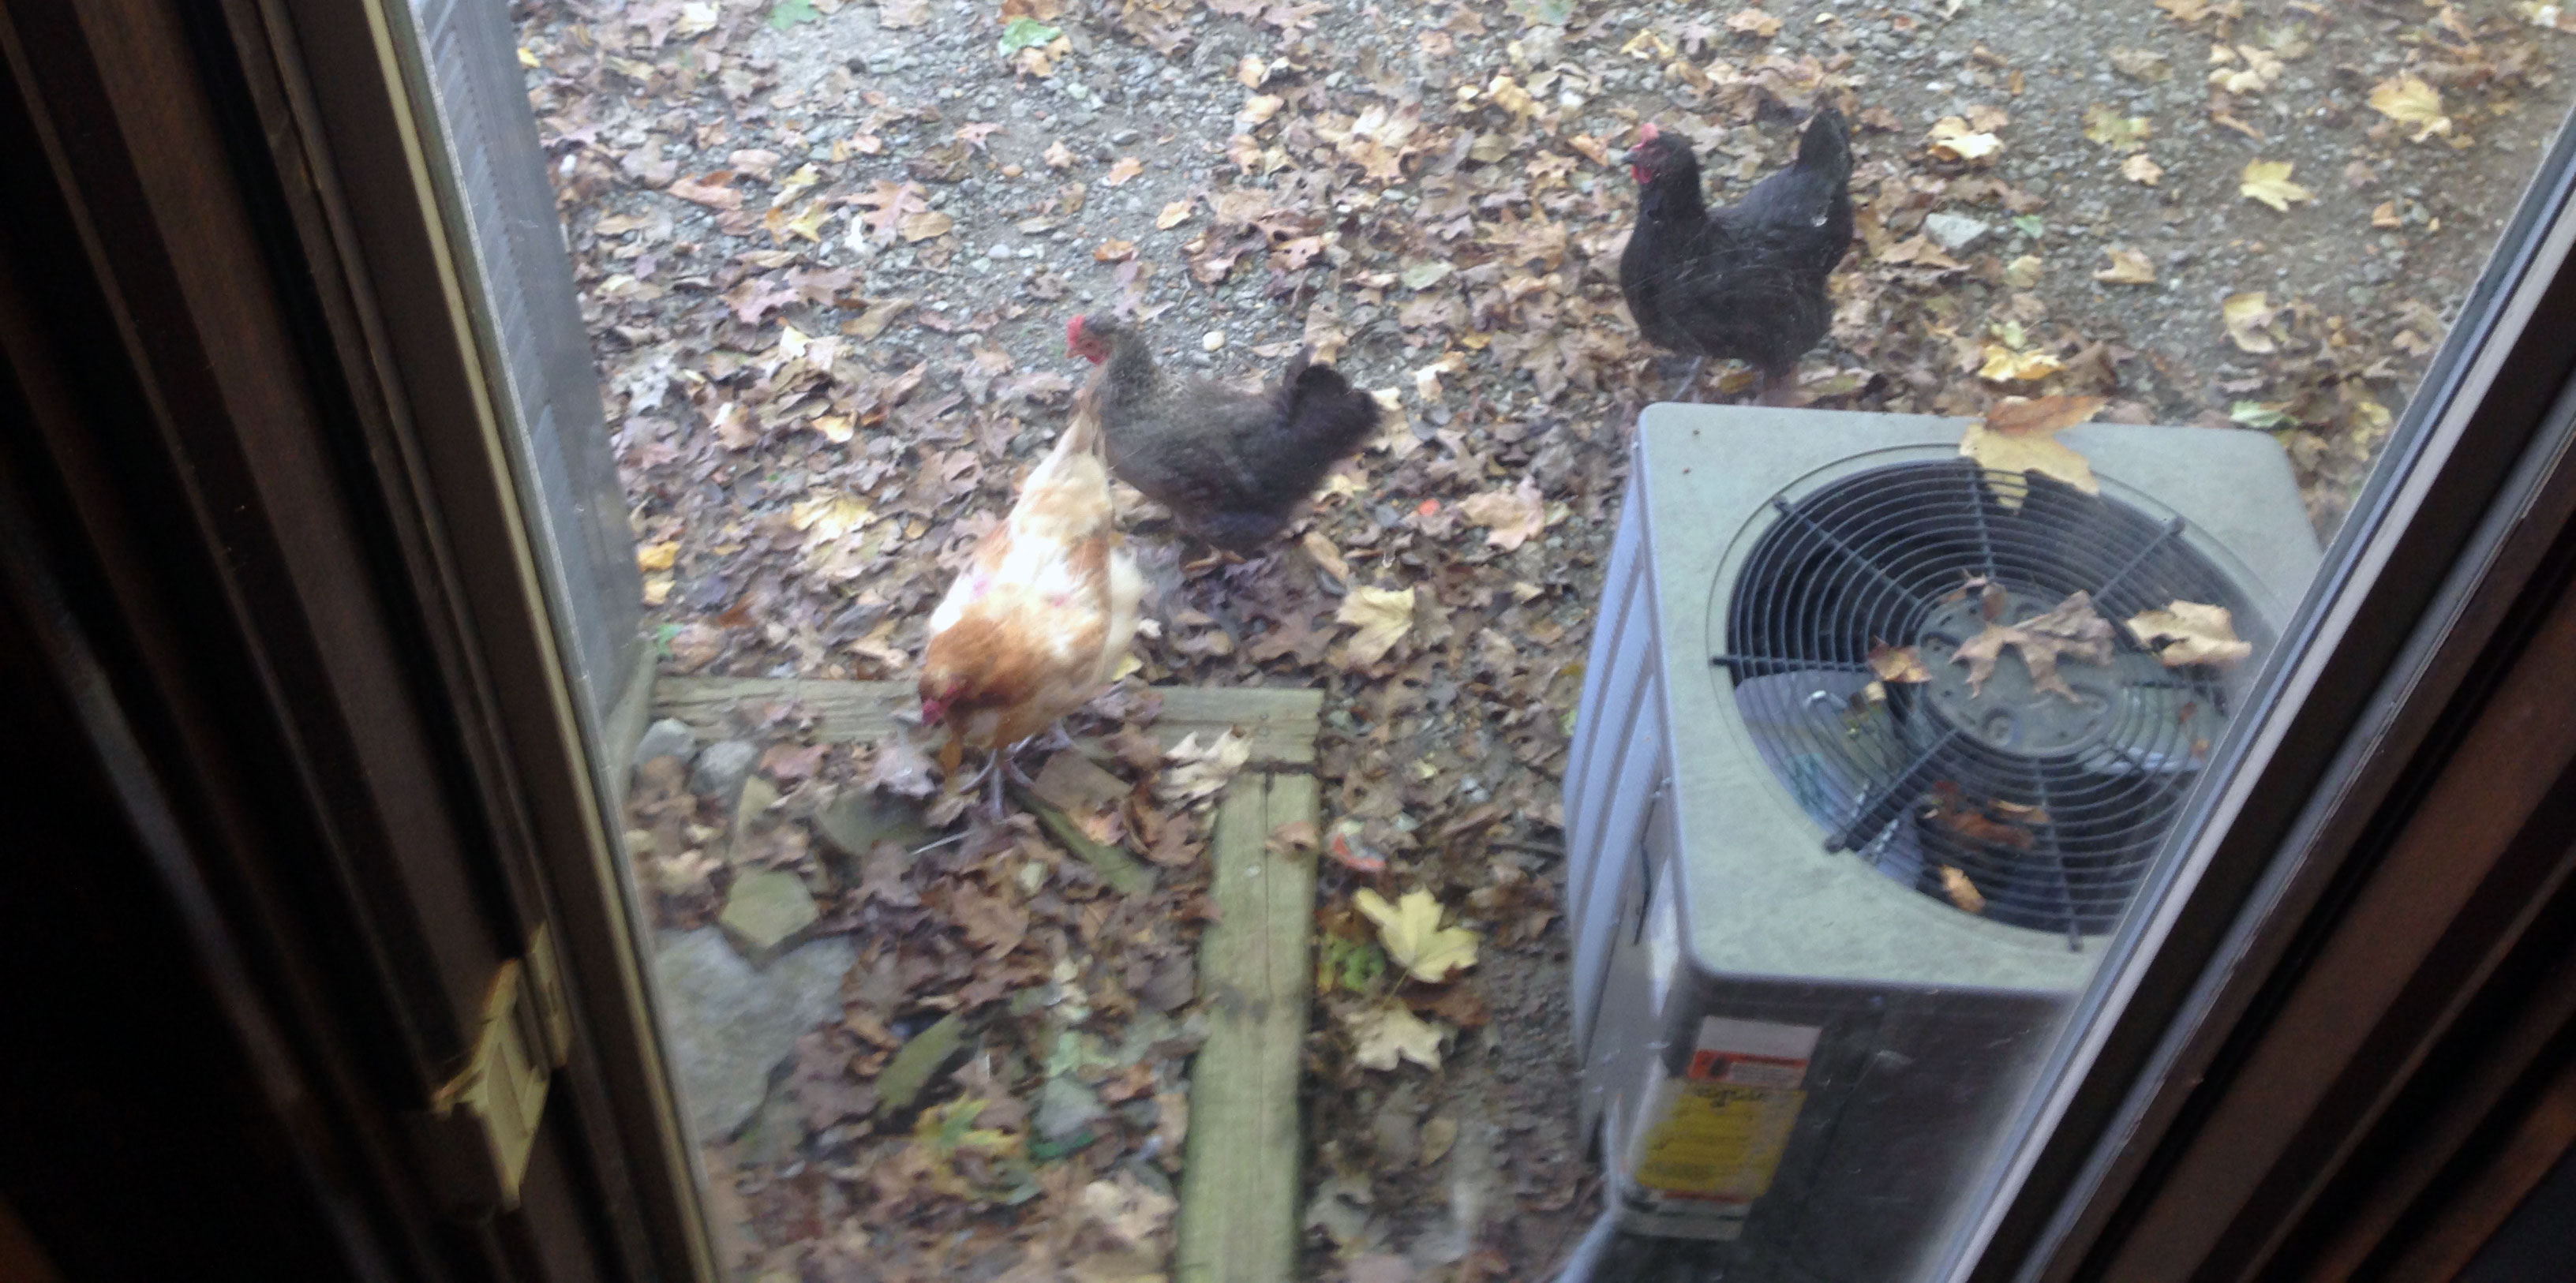 They were aggressive with me, but they'd stay by my side - even staying near the window when they could see me inside!